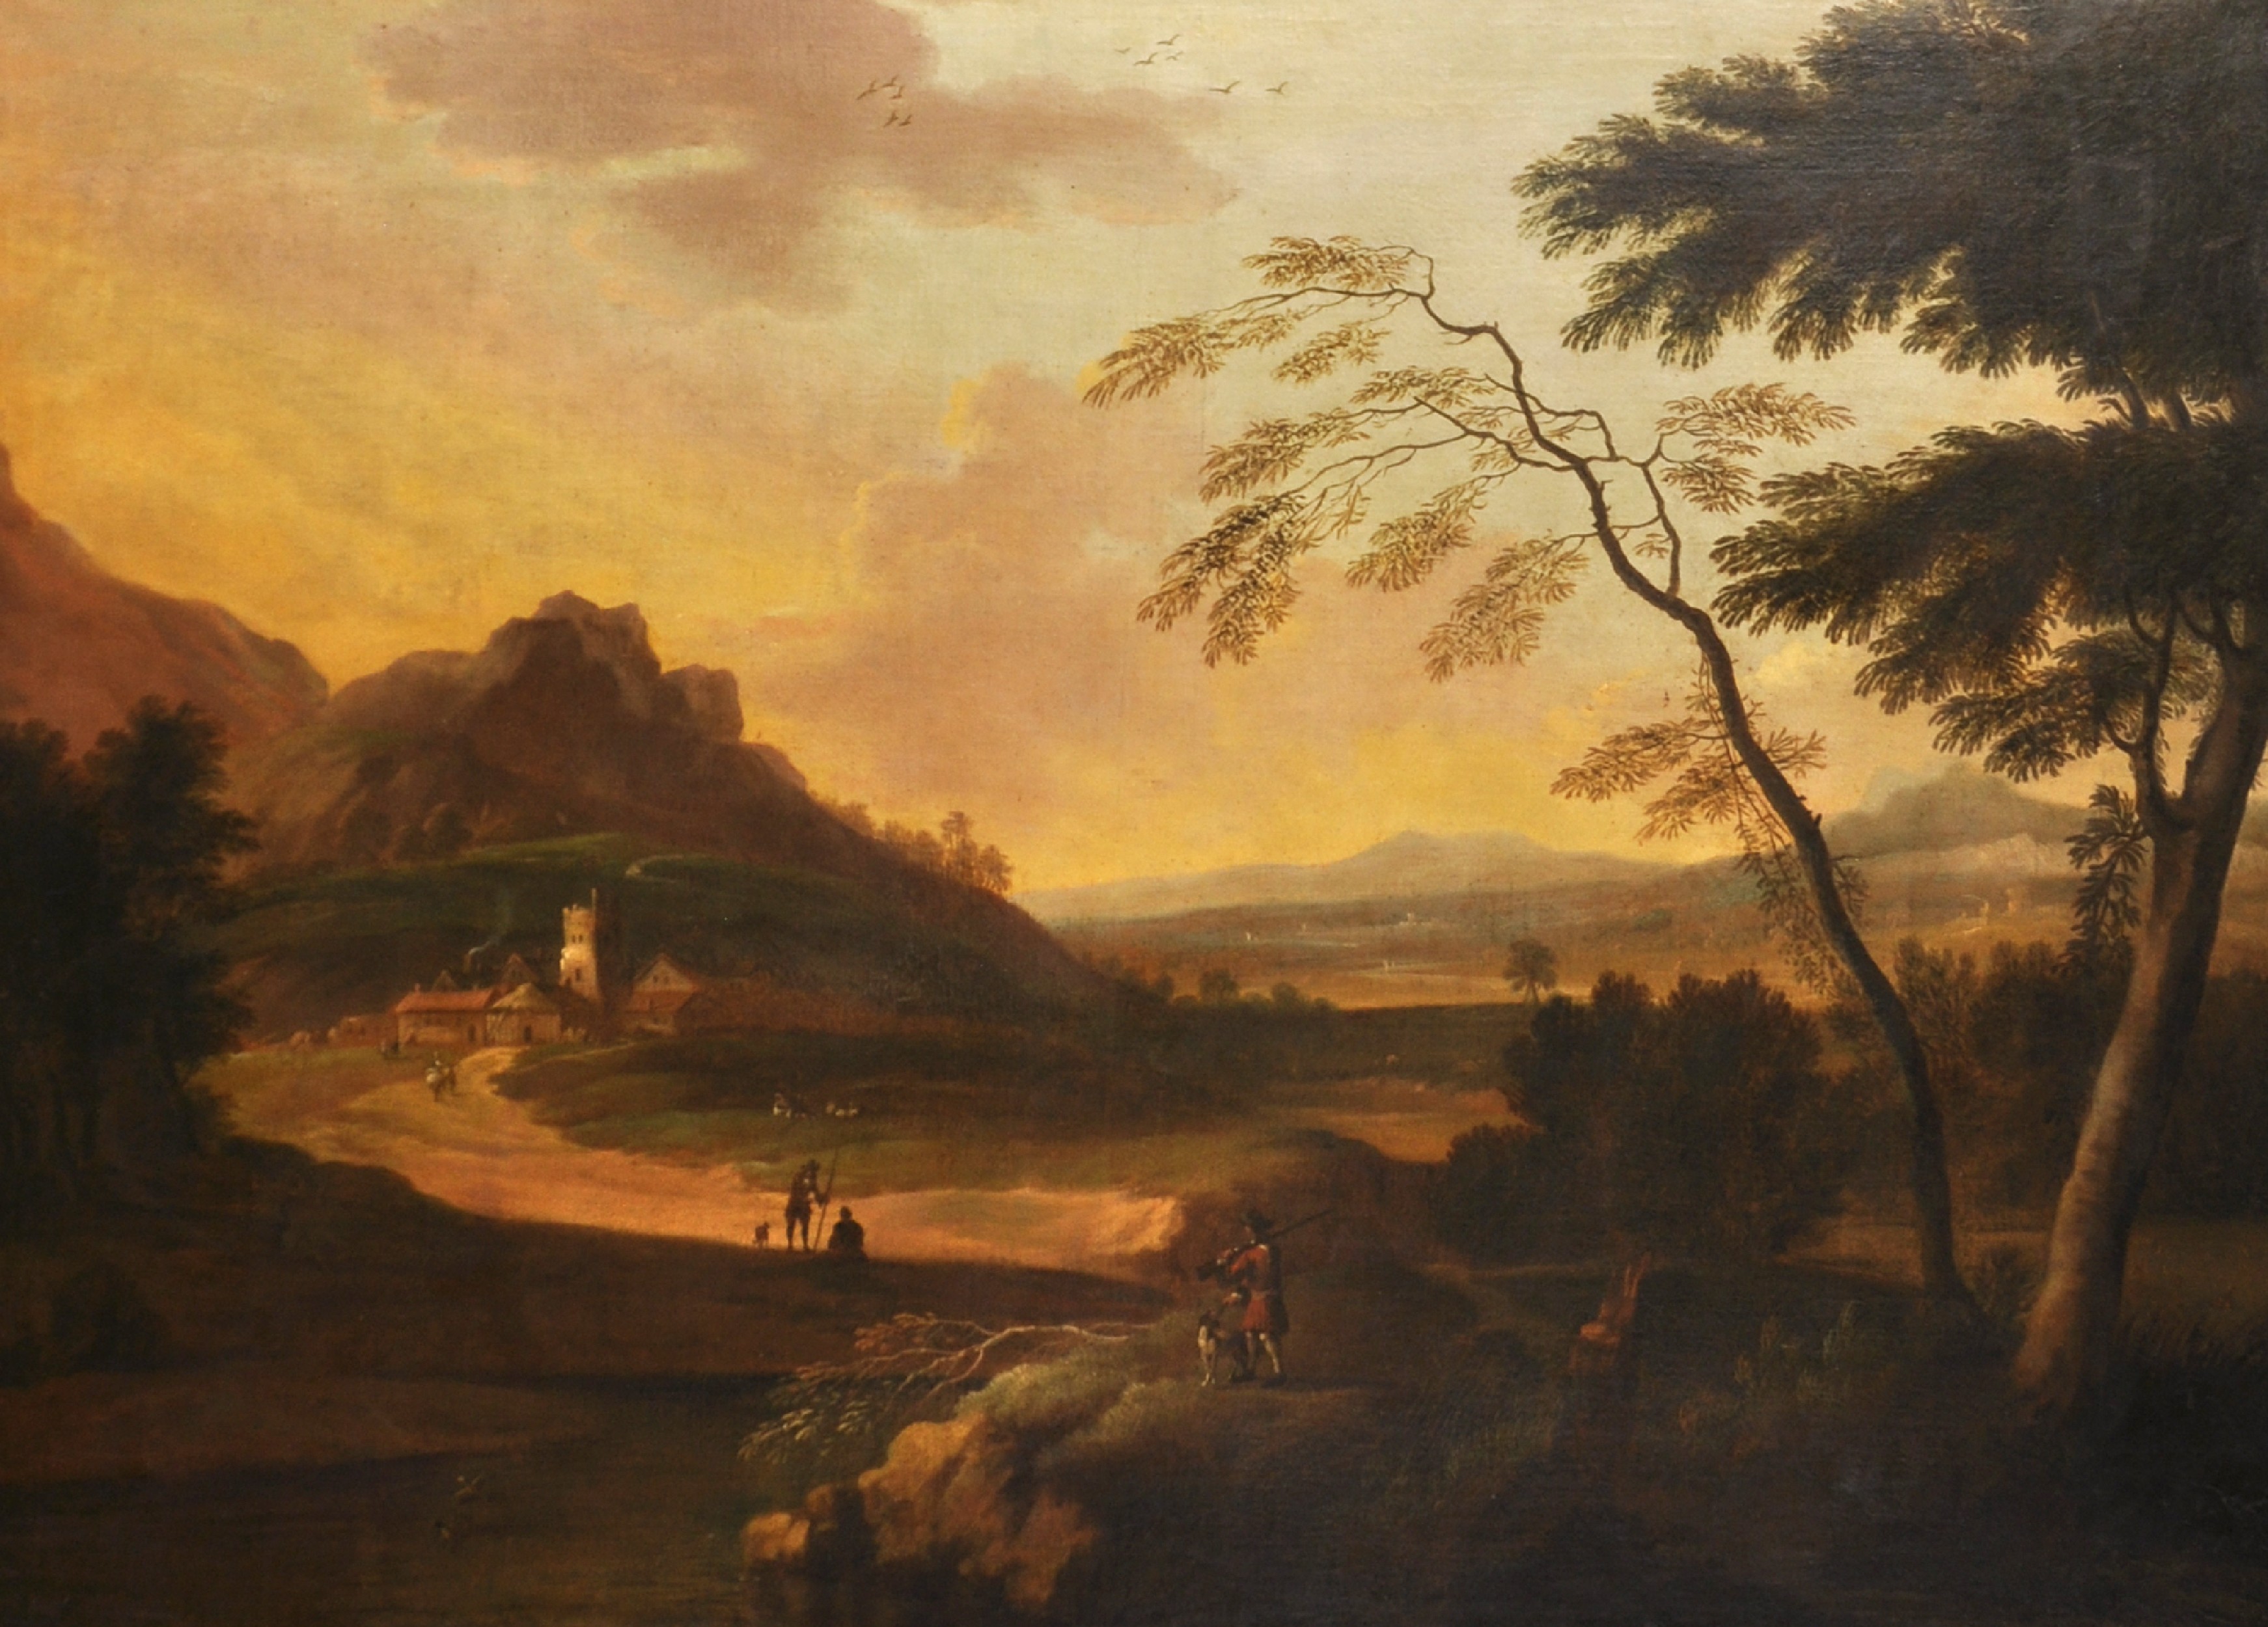 Manner of Hermann Van Swanevelt (c.1603-c.1655) Dutch/French. A Classical Landscape with Figures